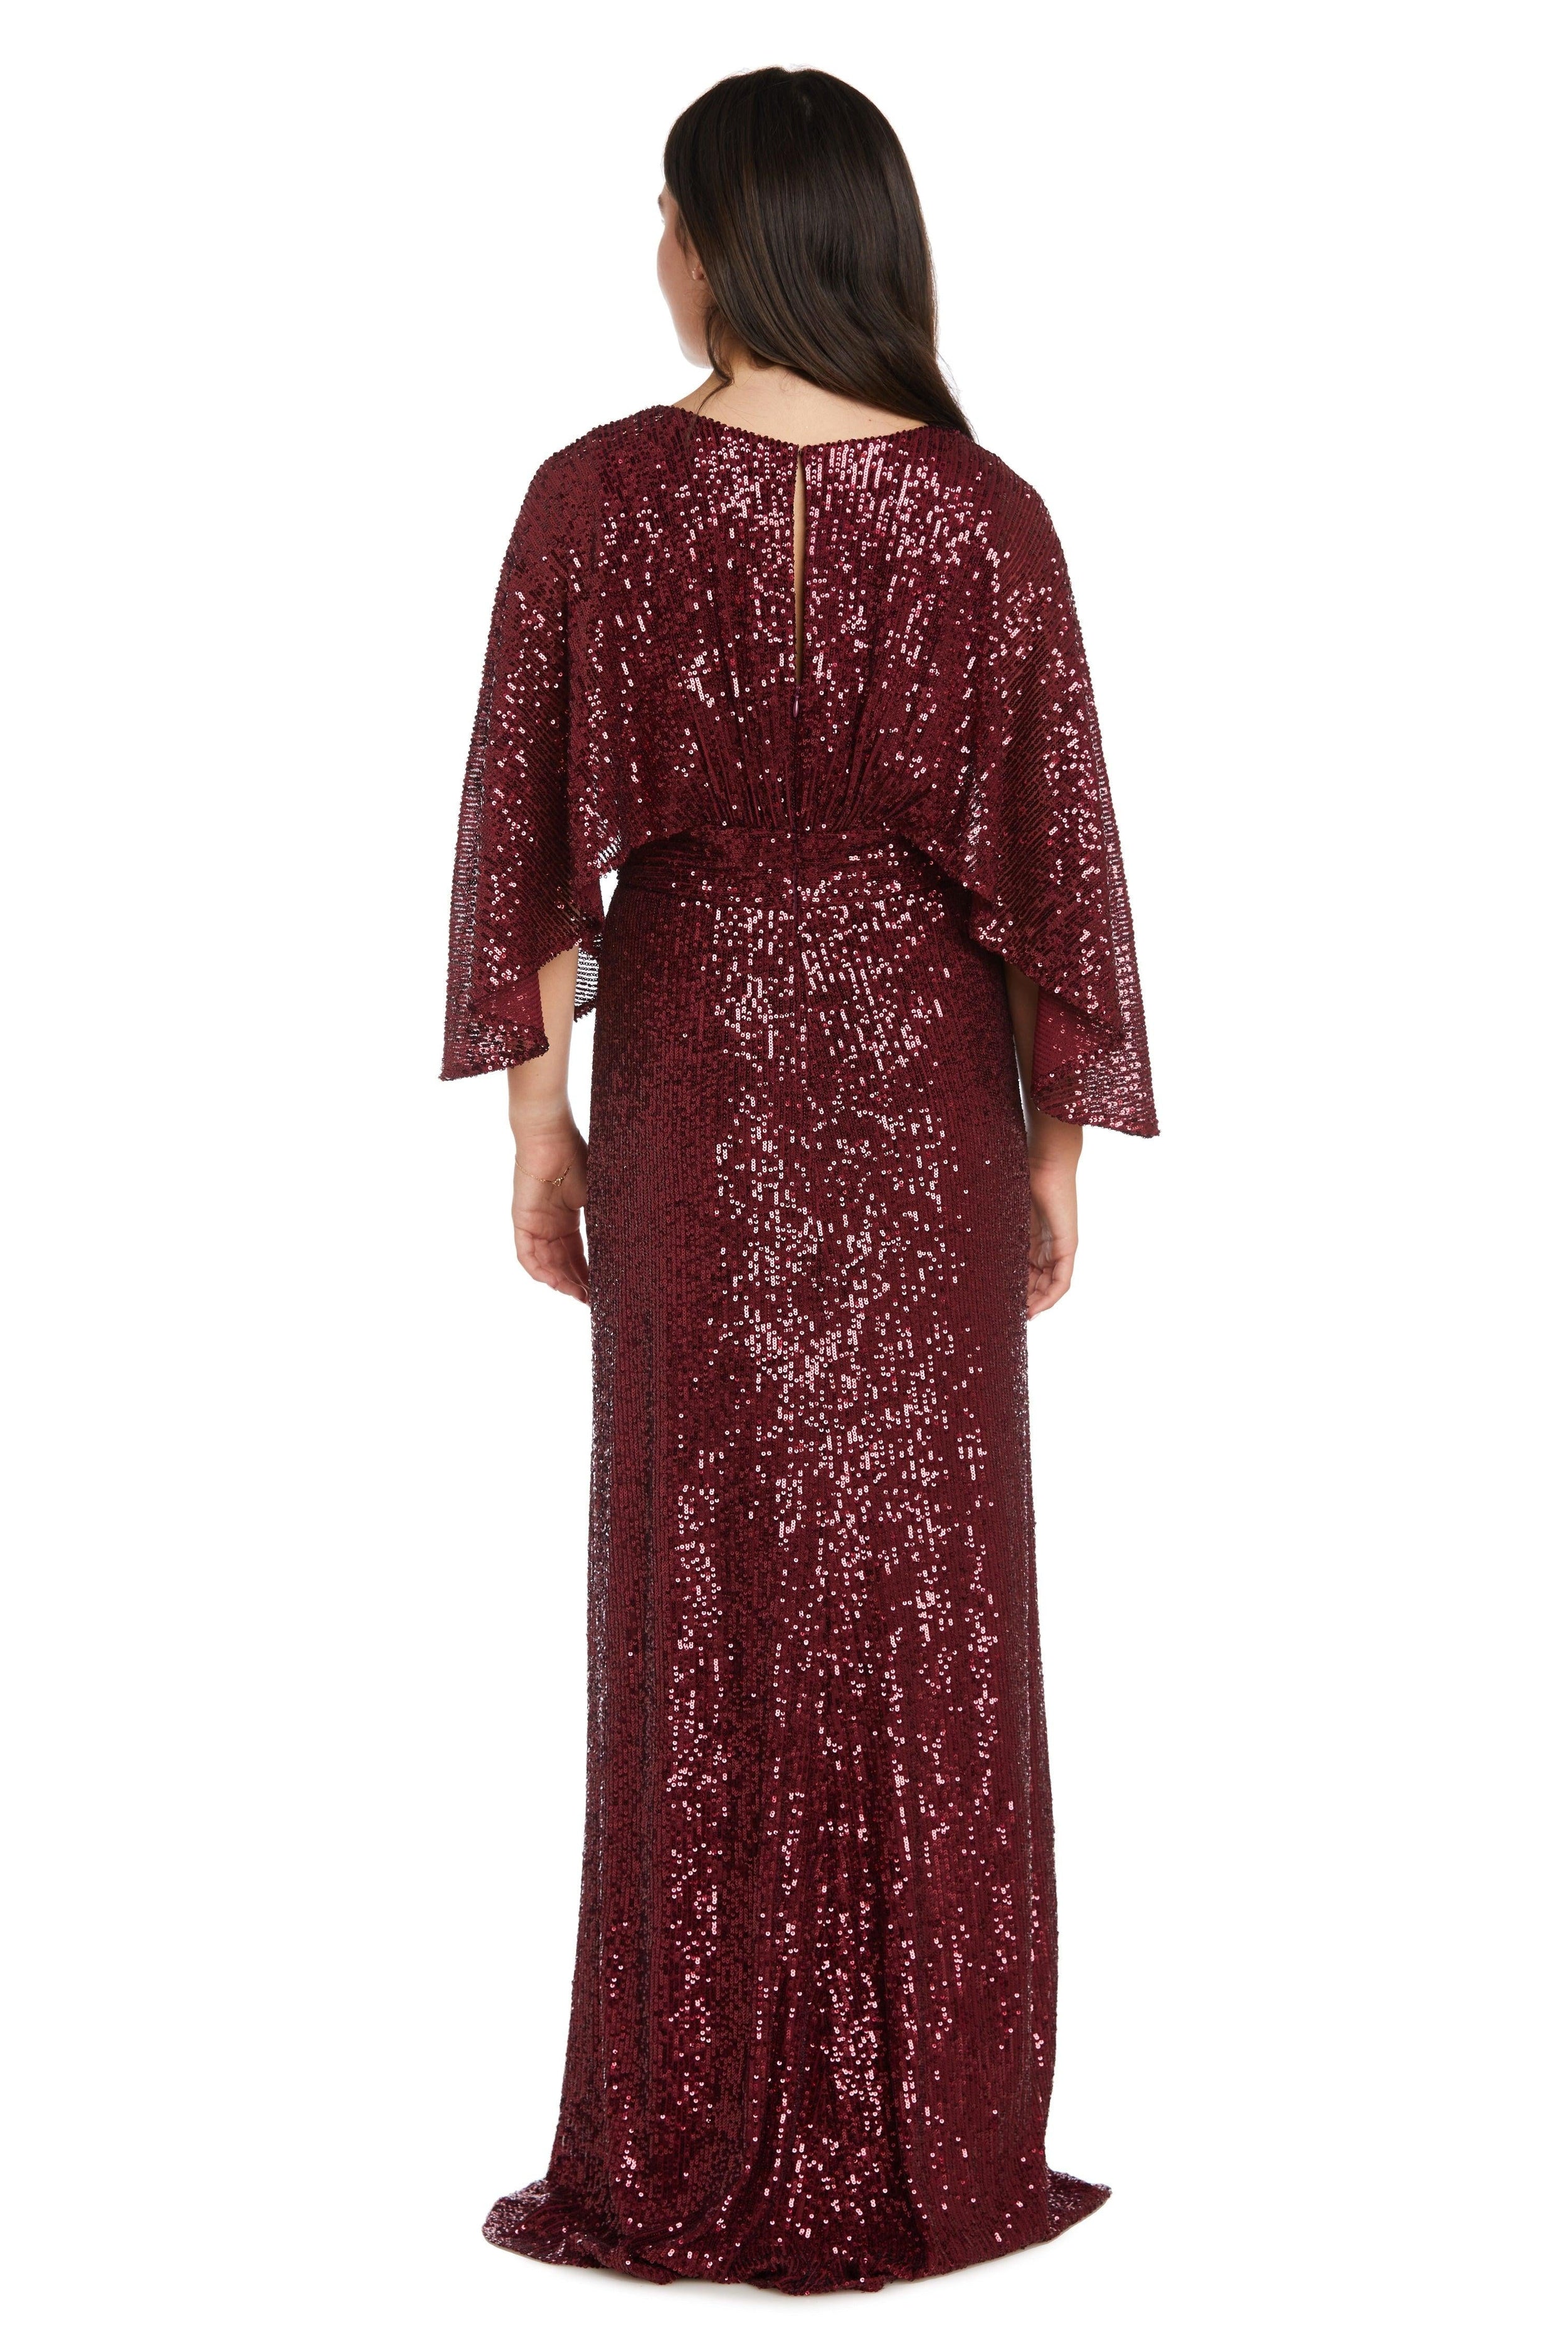 Nightway Long Sleeve Formal Evening Gown 22169 - The Dress Outlet